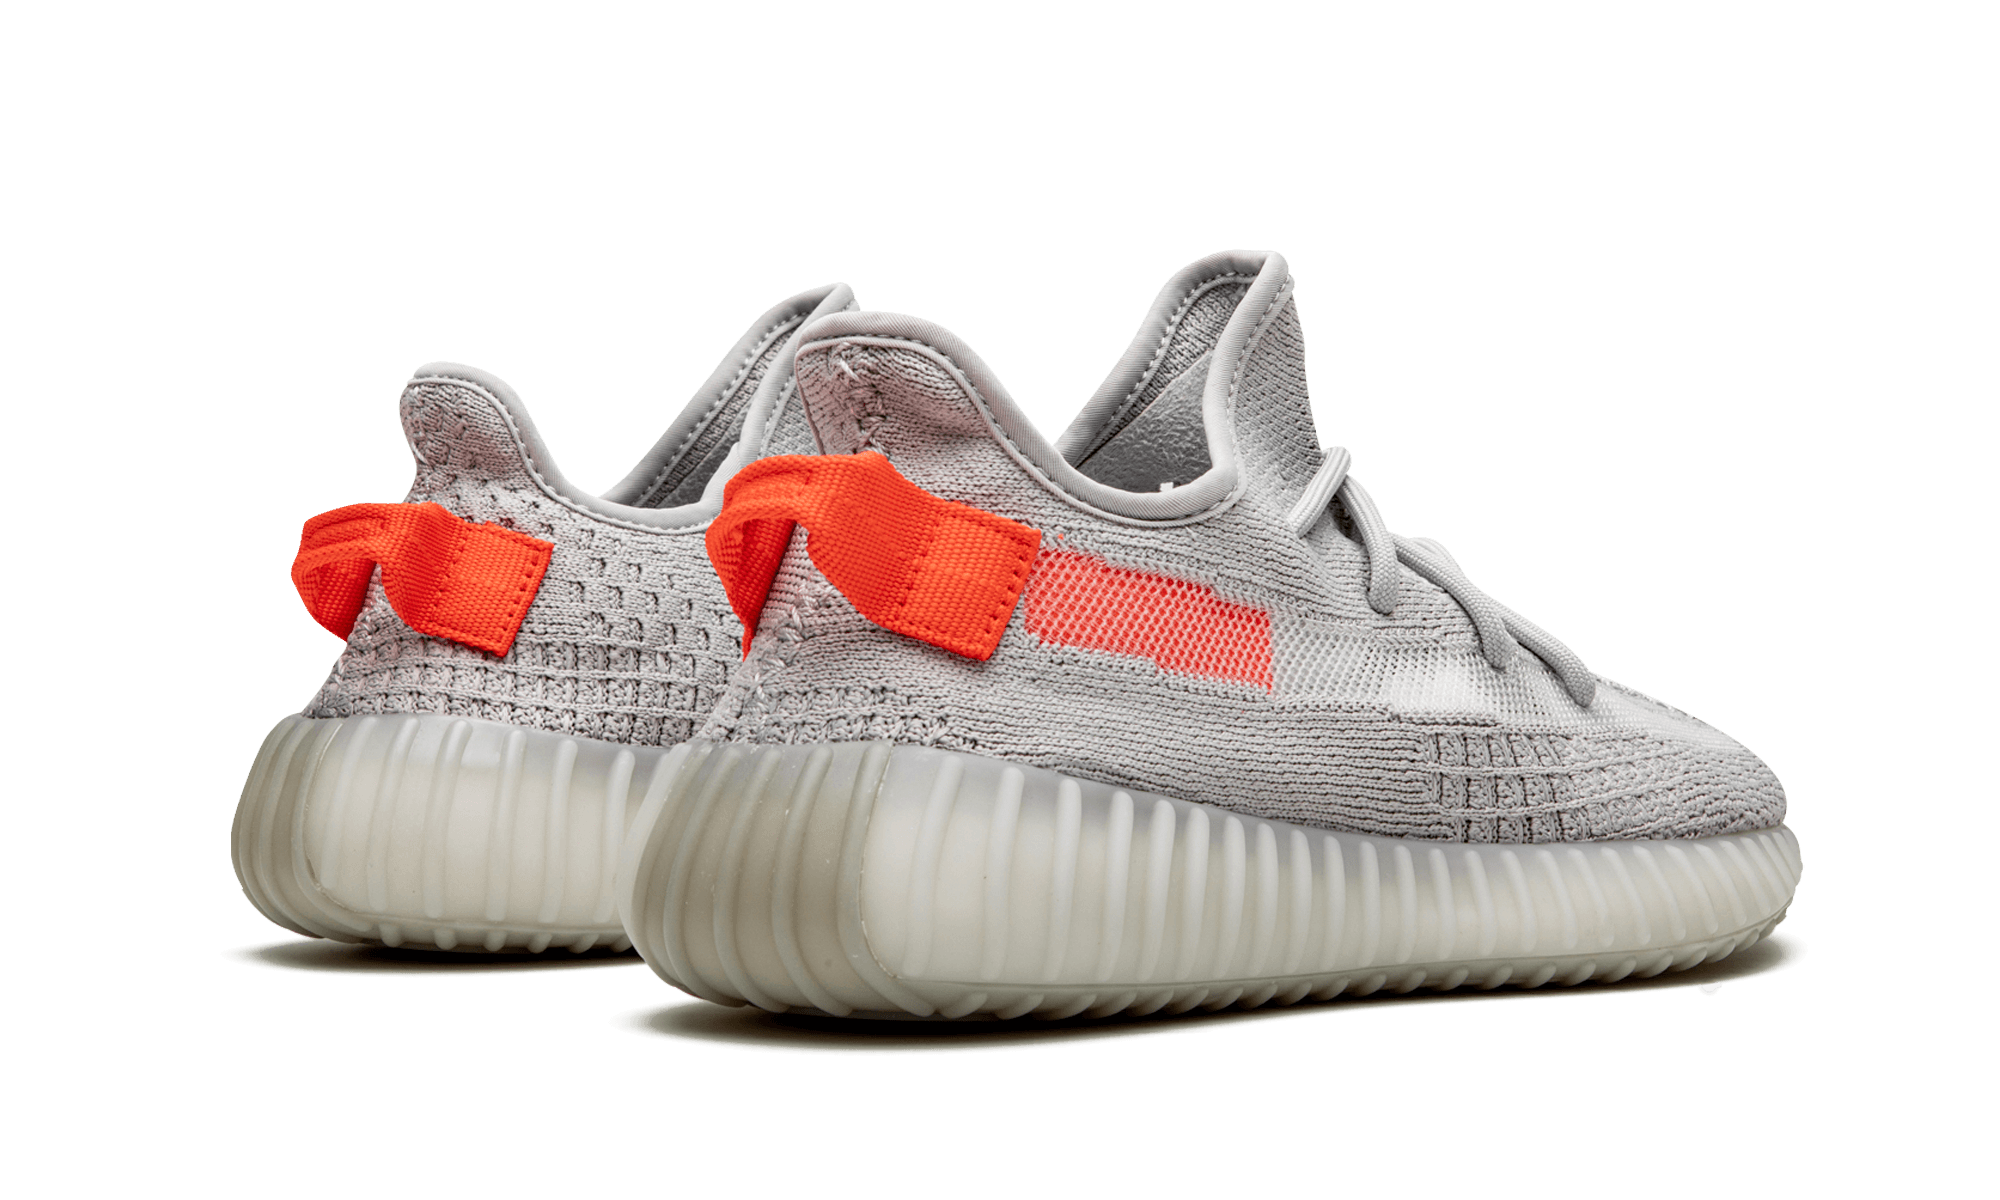 https://cdn.shopify.com/s/files/1/2358/2817/products/Wethenew-Adidas-Yeezy-Boost-350-V2-Tail-Light-3_1.png?v=1582198475